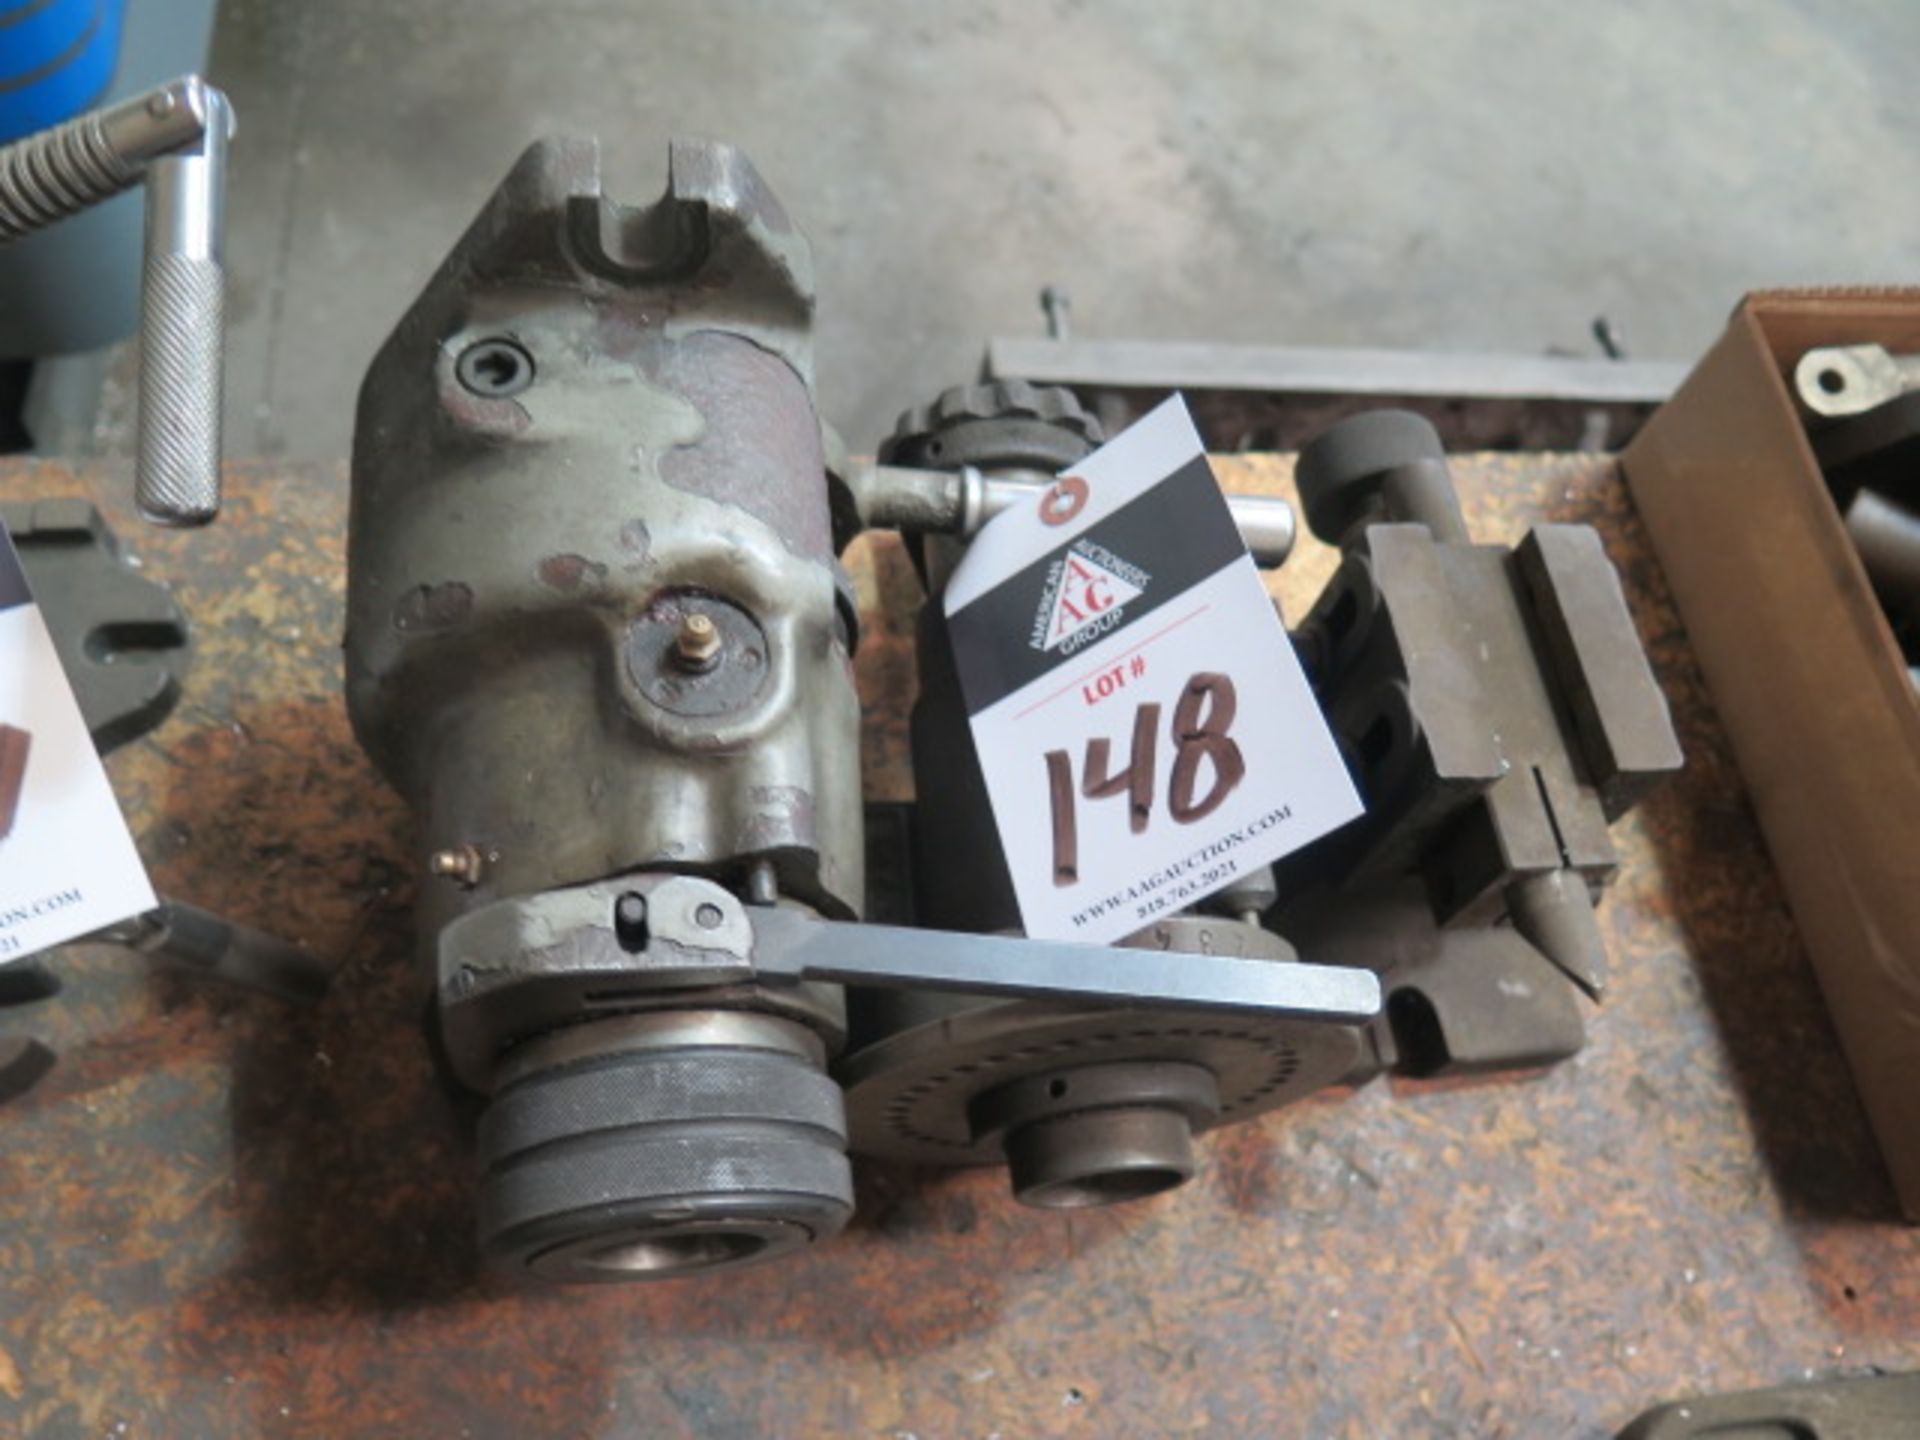 5C Indexing Head, 5C Spin Fixture and Mill Center